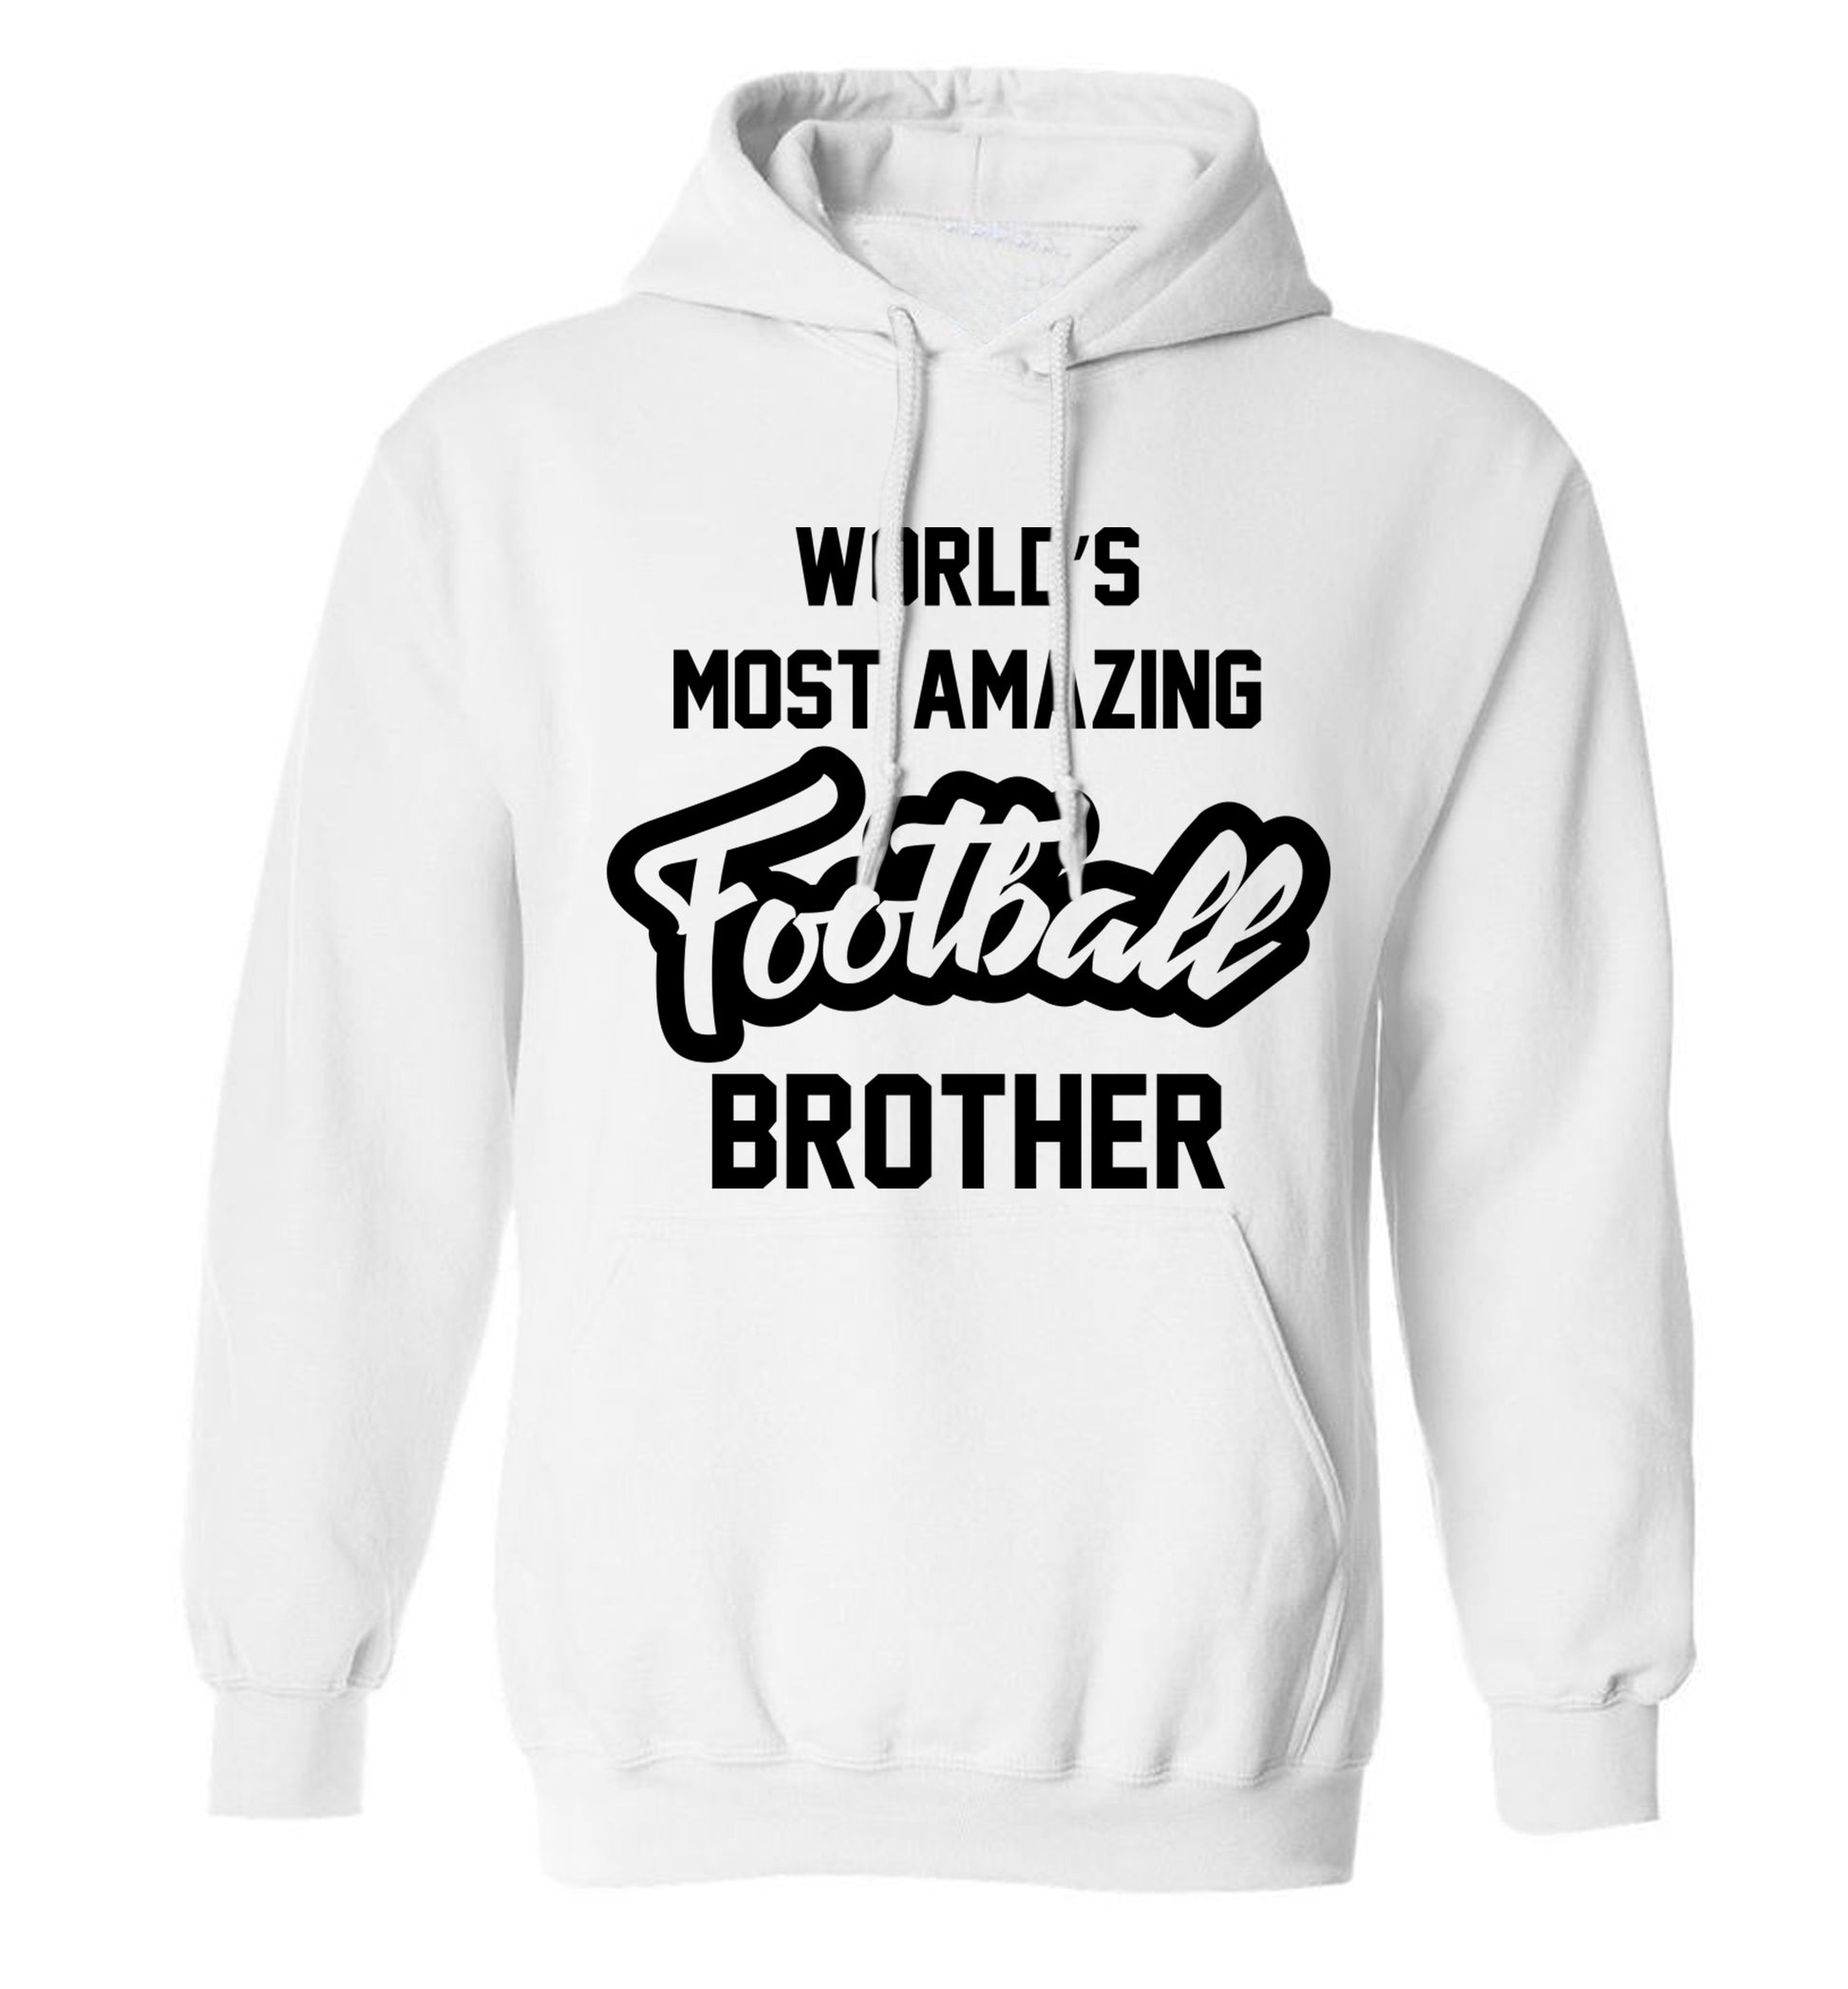 Worlds most amazing football brother adults unisexwhite hoodie 2XL